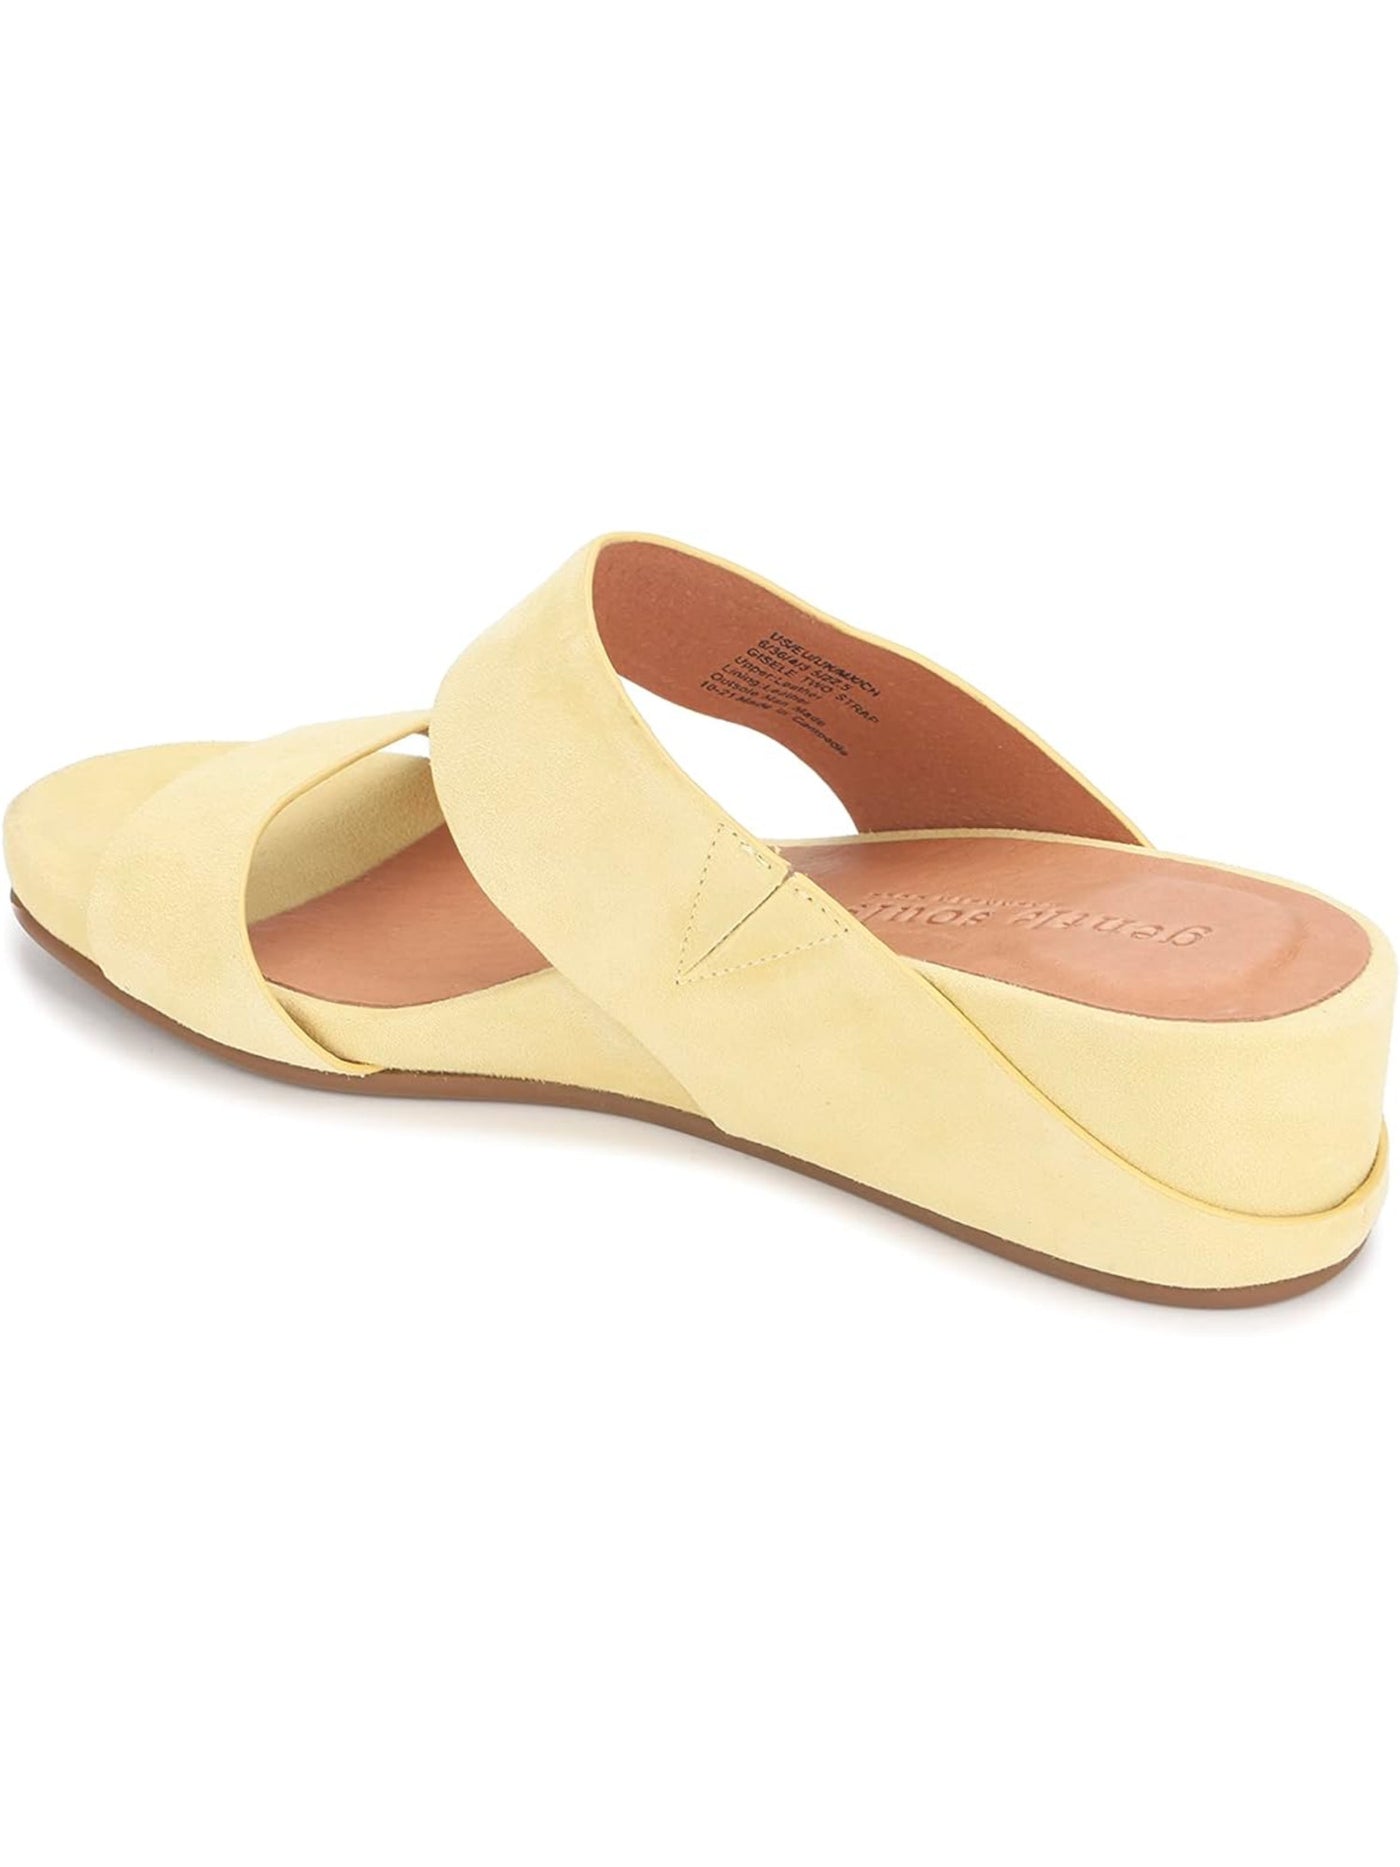 GENTLE SOULS KENNETH COLE Womens Yellow Breathable Comfort Gisele Round Toe Wedge Slip On Leather Slide Sandals Shoes 7 M